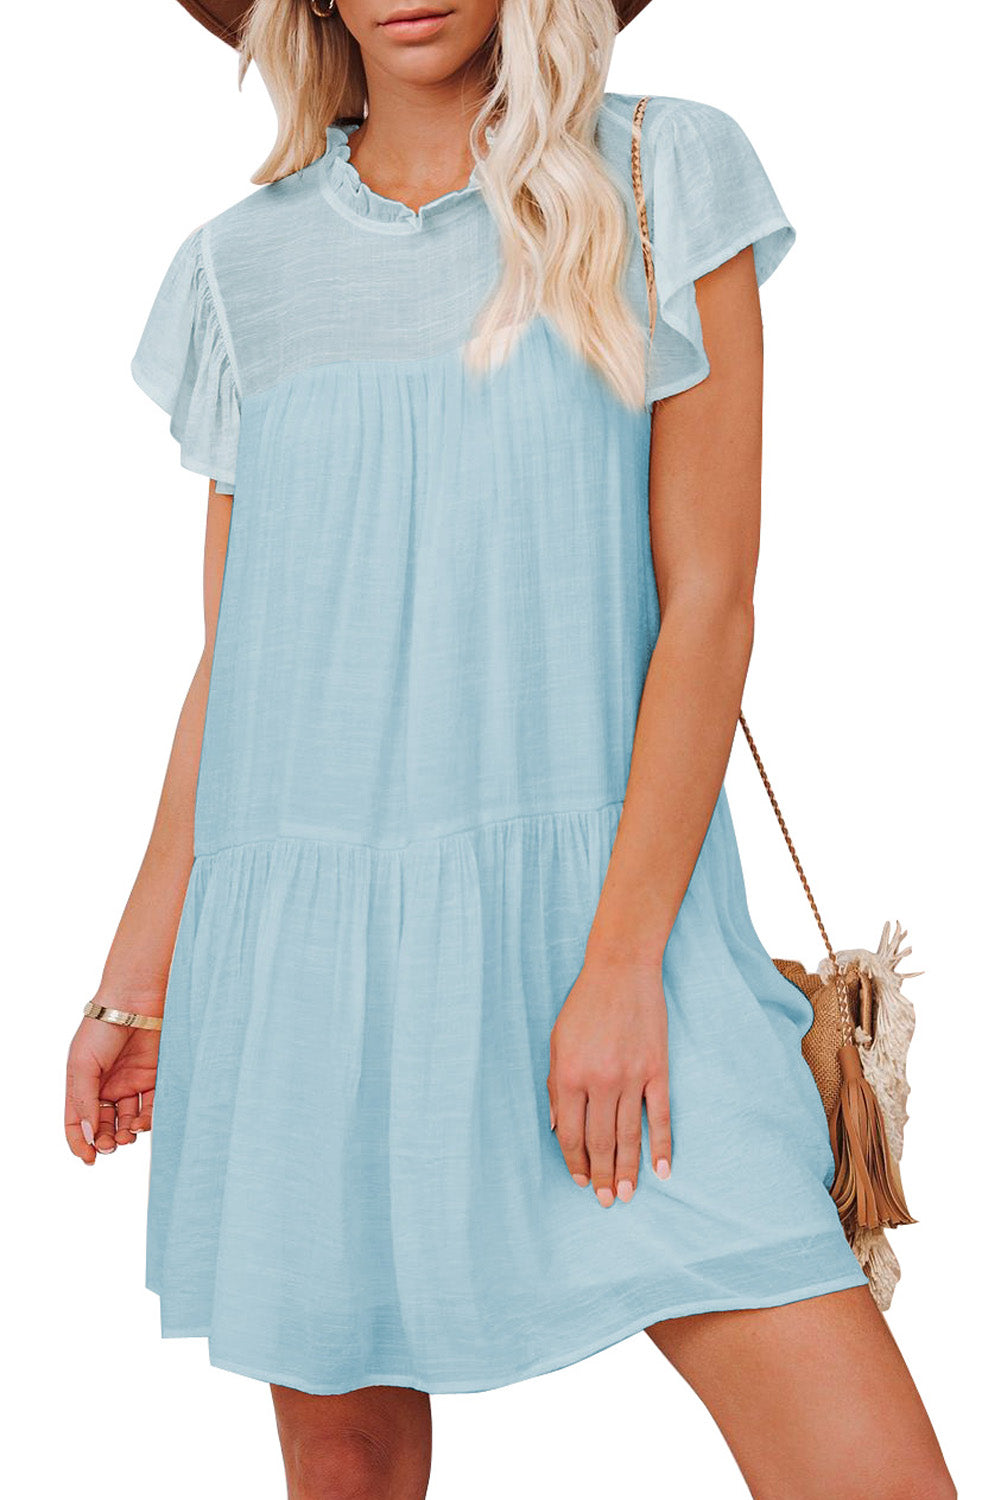 Sky Blue White Dress With Sleeves Frilled Neck Ruffle Swing Mini Dress LC225229-4